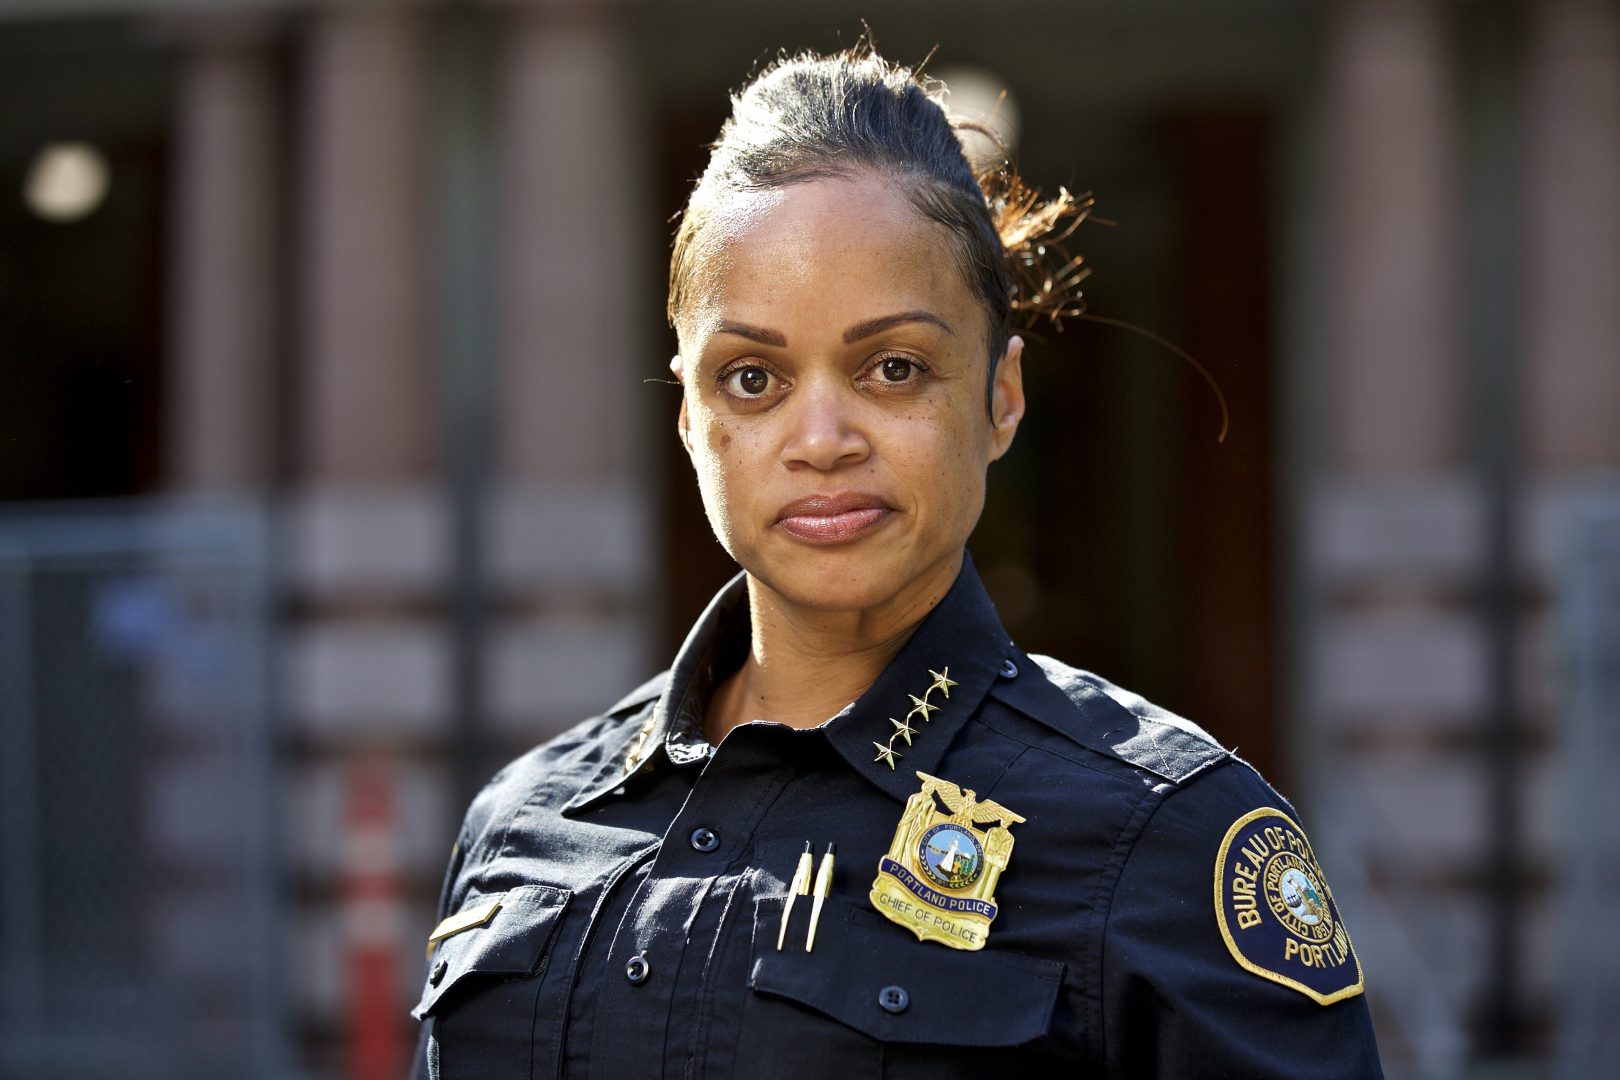 FILE - In this Aug. 5, 2019, file photo, Portland Police Chief Danielle Outlaw poses for a photo in Portland, Ore. Outlaw was named  the new Philadelphia police commissioner (AP Photo/Craig Mitchelldyer, File)